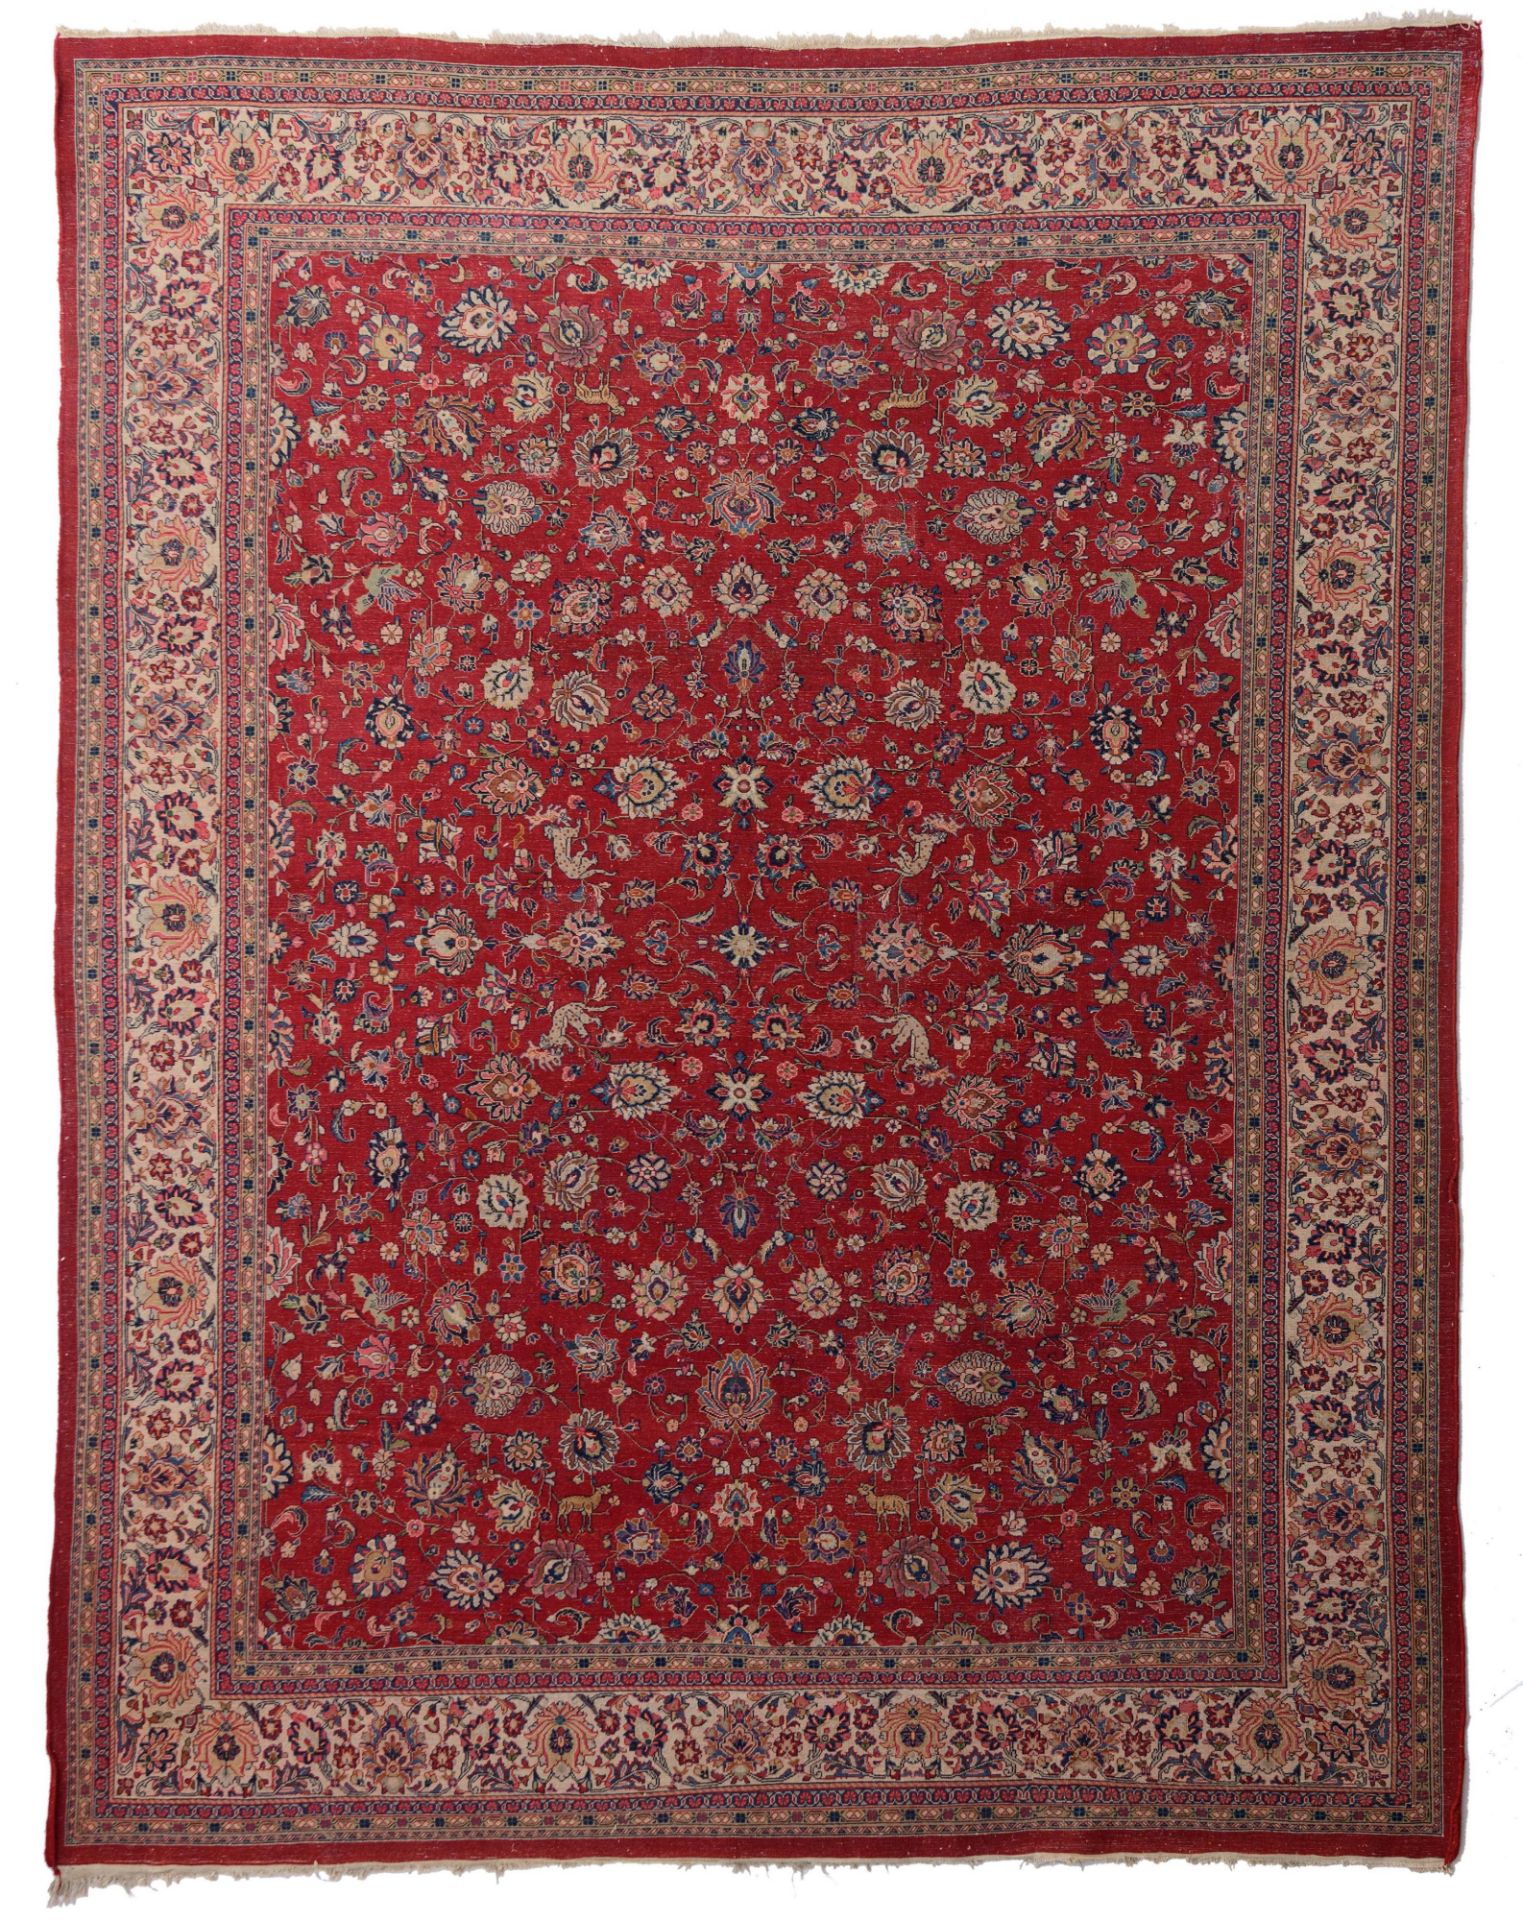 A large Oriental Sarourg carpet, floral decorated with leopards and deers, 297 cm x 378 cm - Image 2 of 7